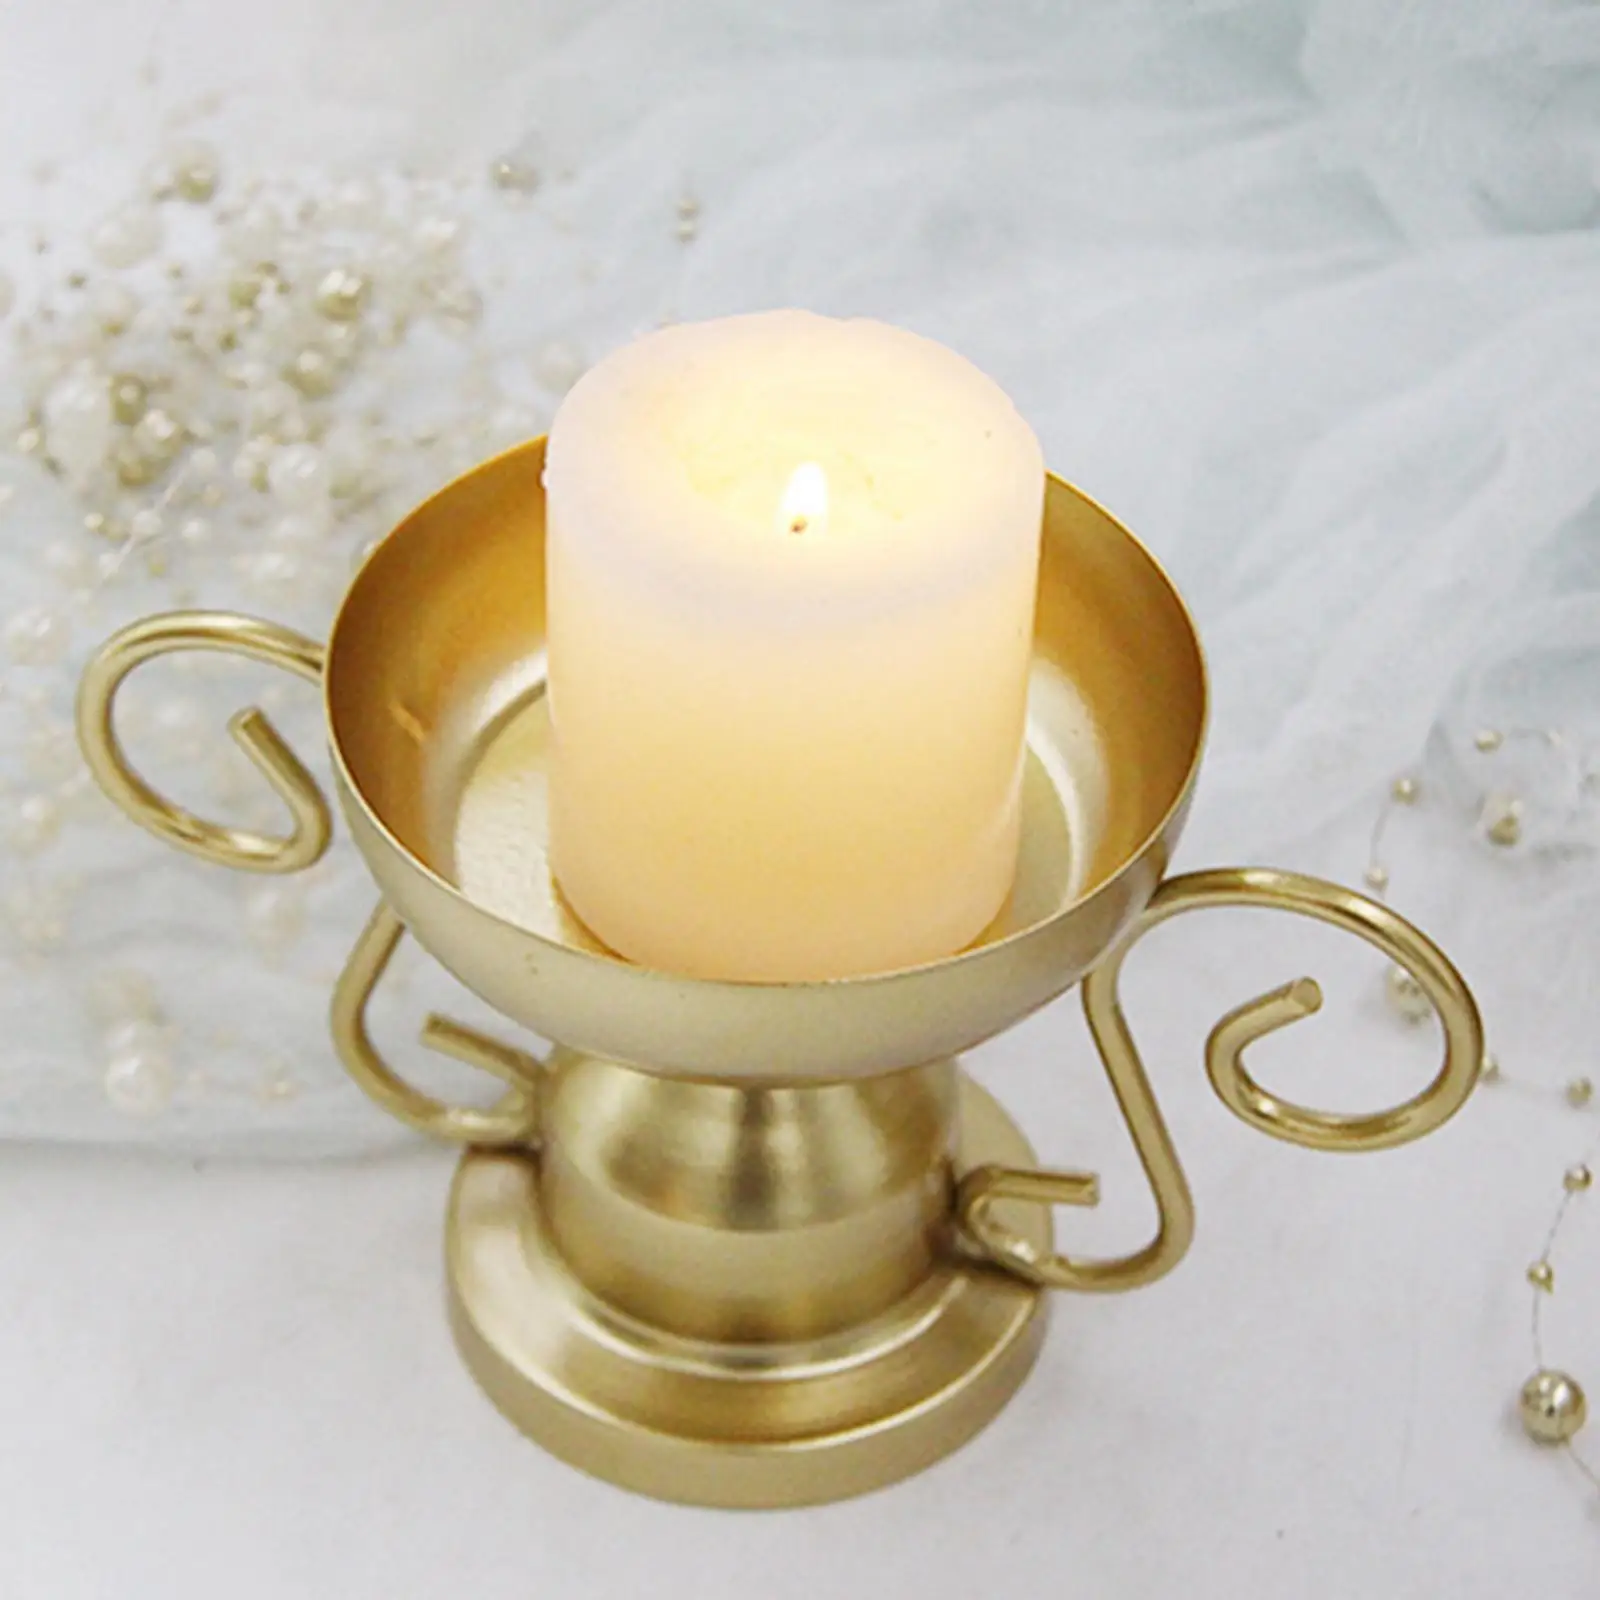 Candle Holder Table Centerpiece Ornaments Decor Romantic Candlestick Plate for Christmas Gifts Valentines Day Wedding Home Party